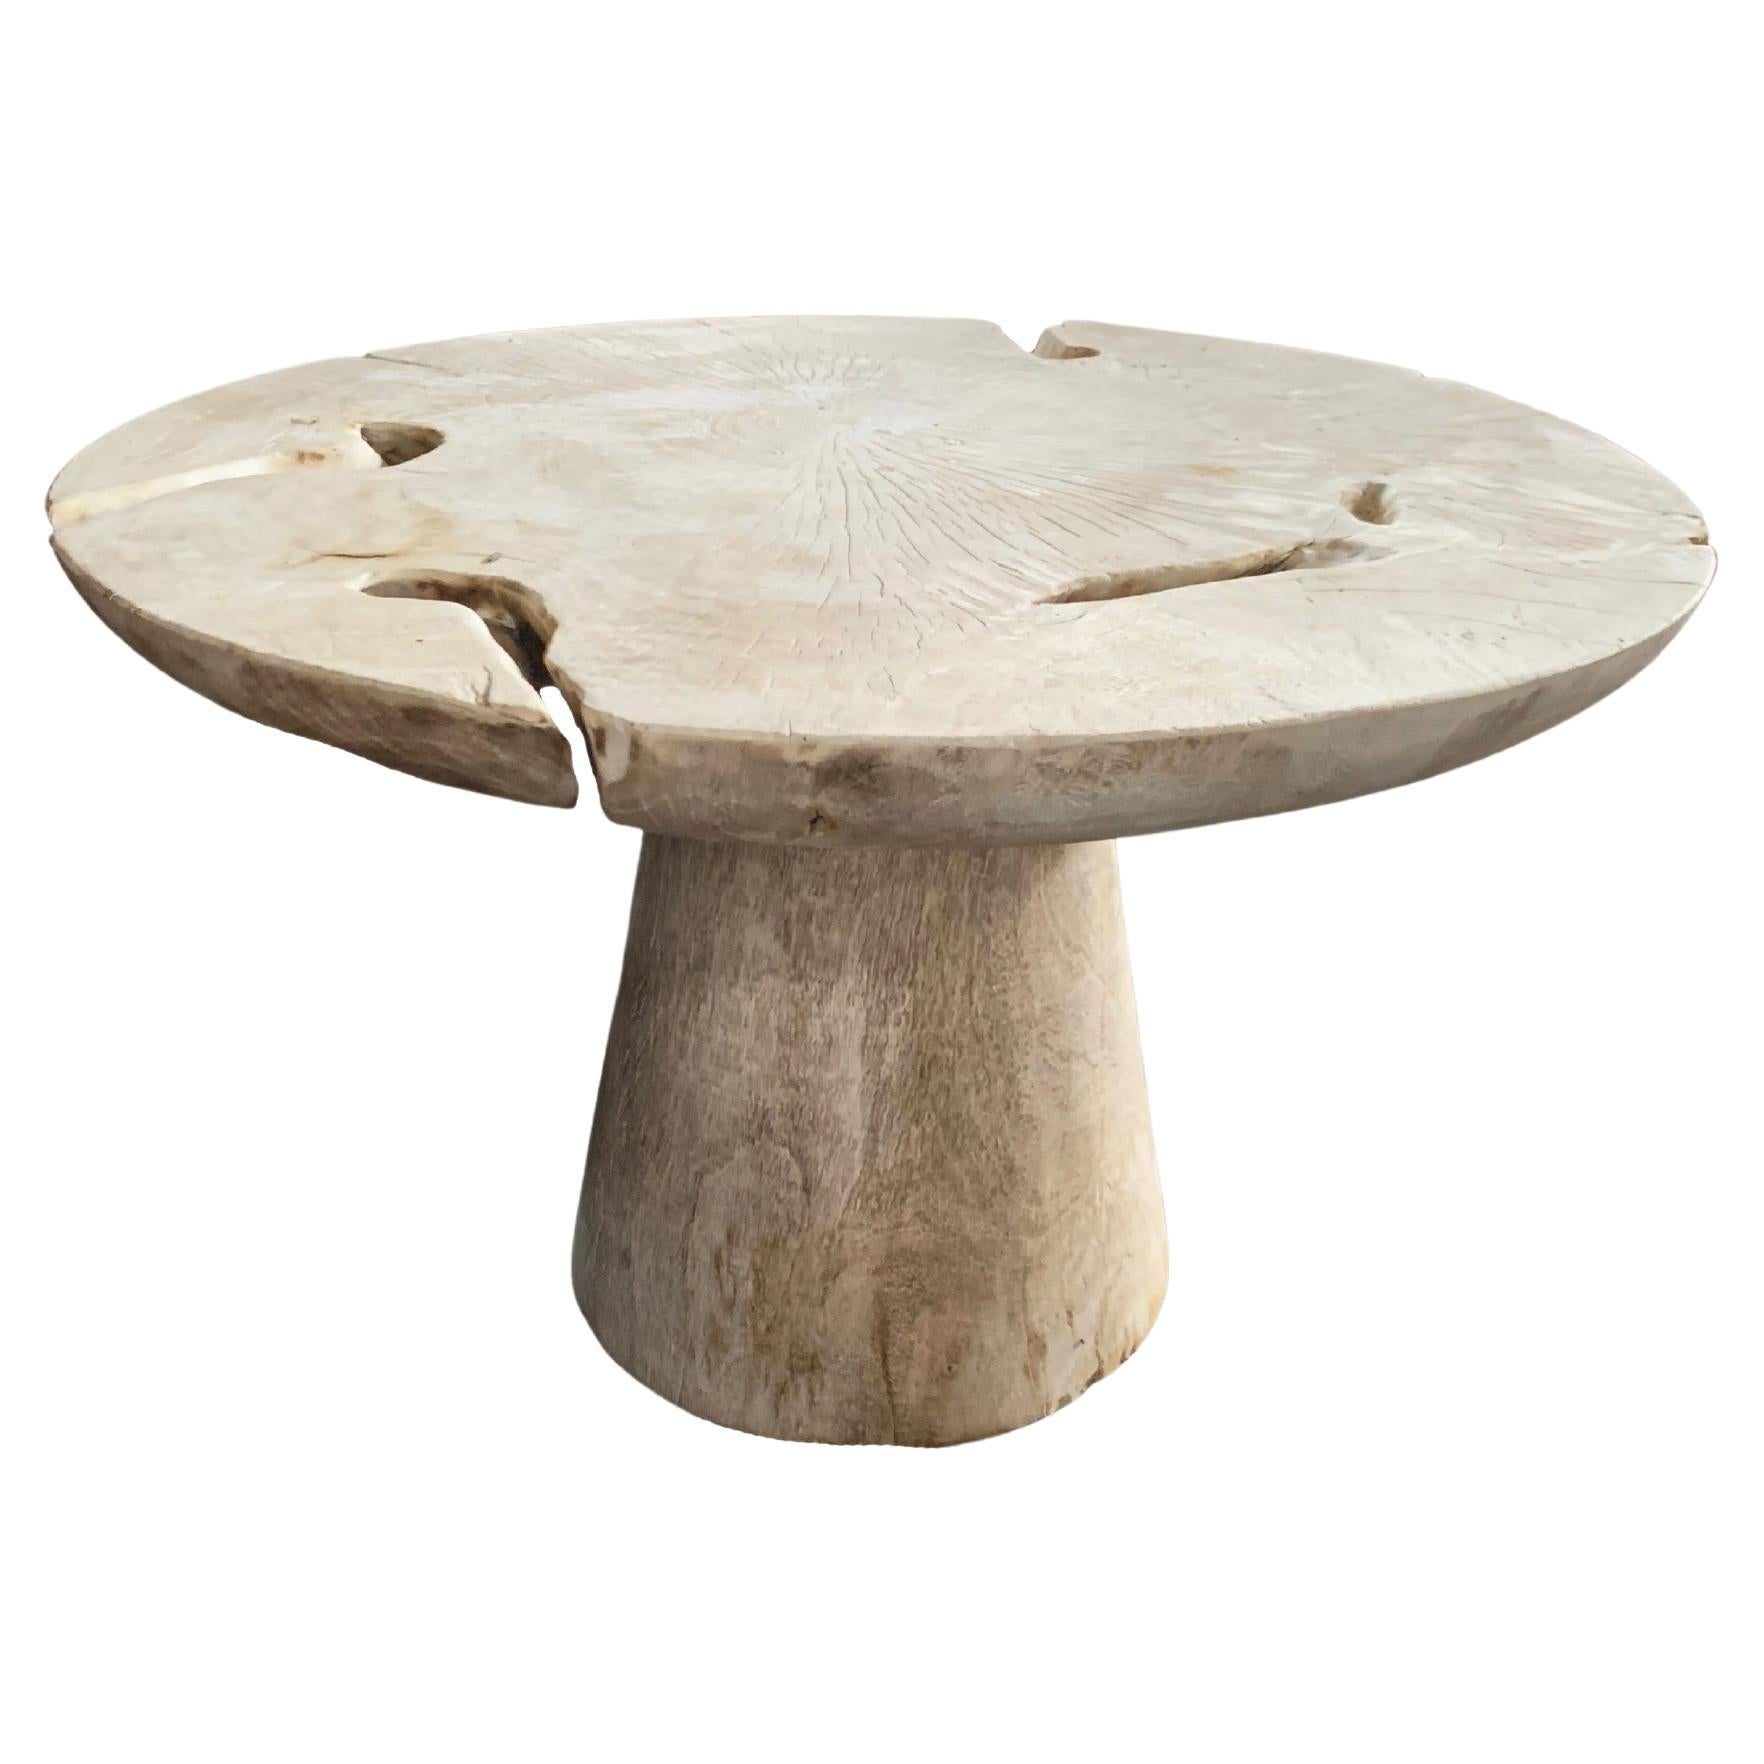 Sculptural Round Table Crafted from Mango Wood, Modern Organic